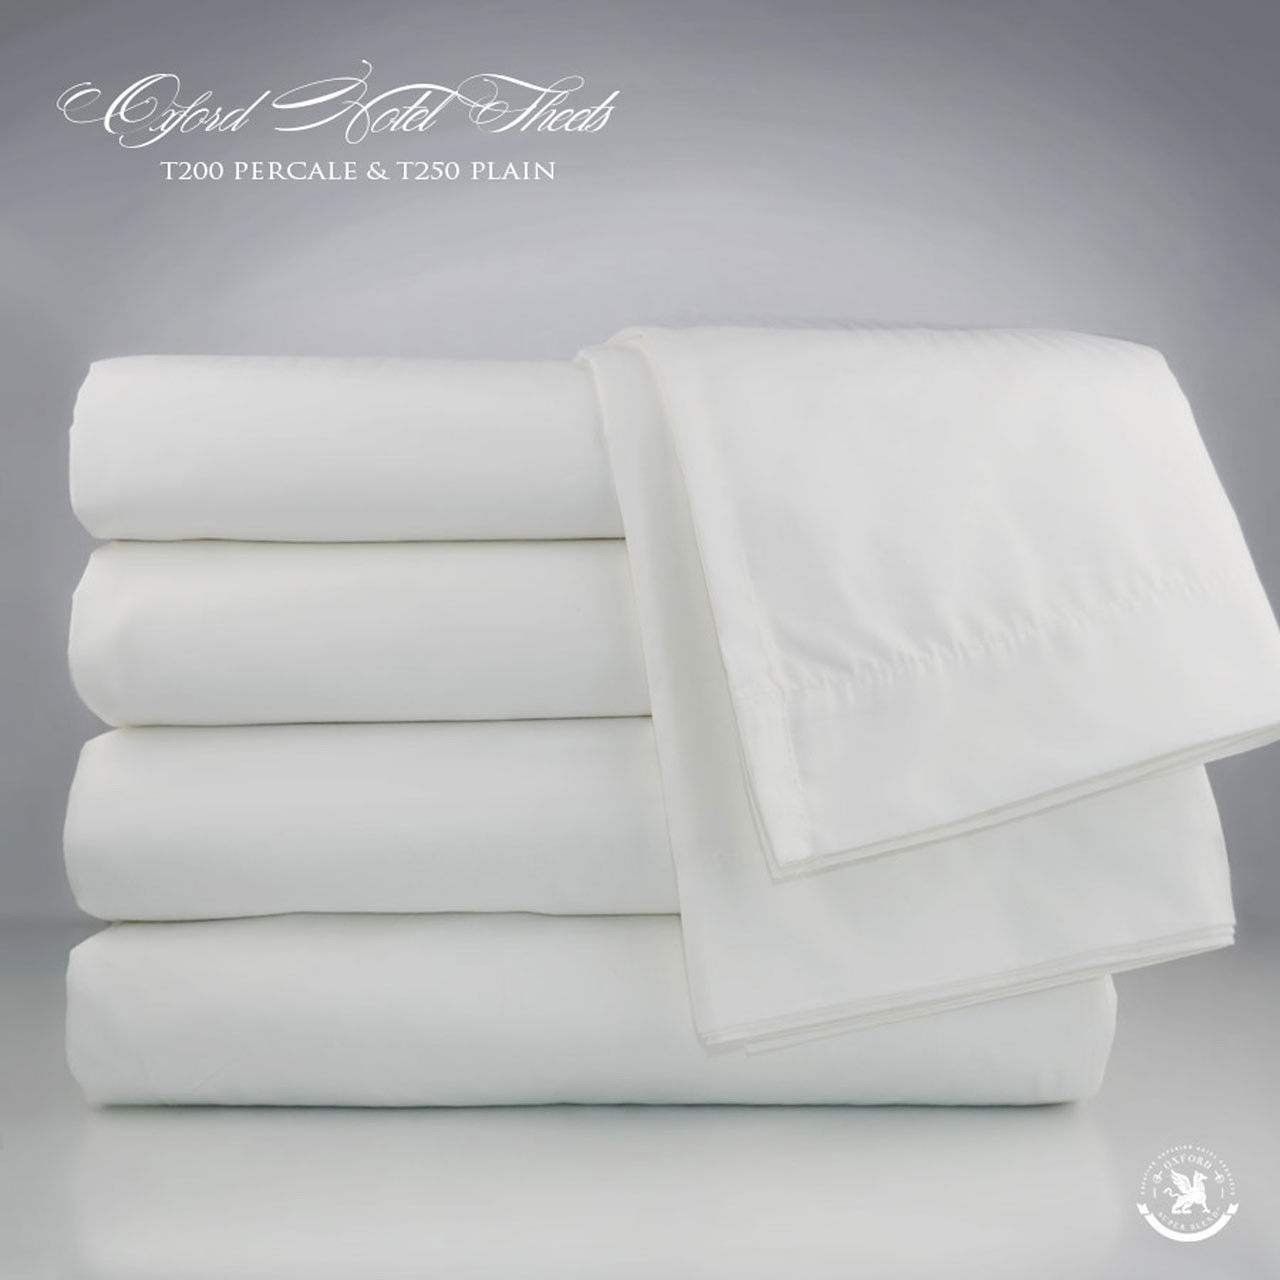 What is the material composition of the Oxford Superblend Bed Linens T-200, also known as Oxford Super Blend sheet